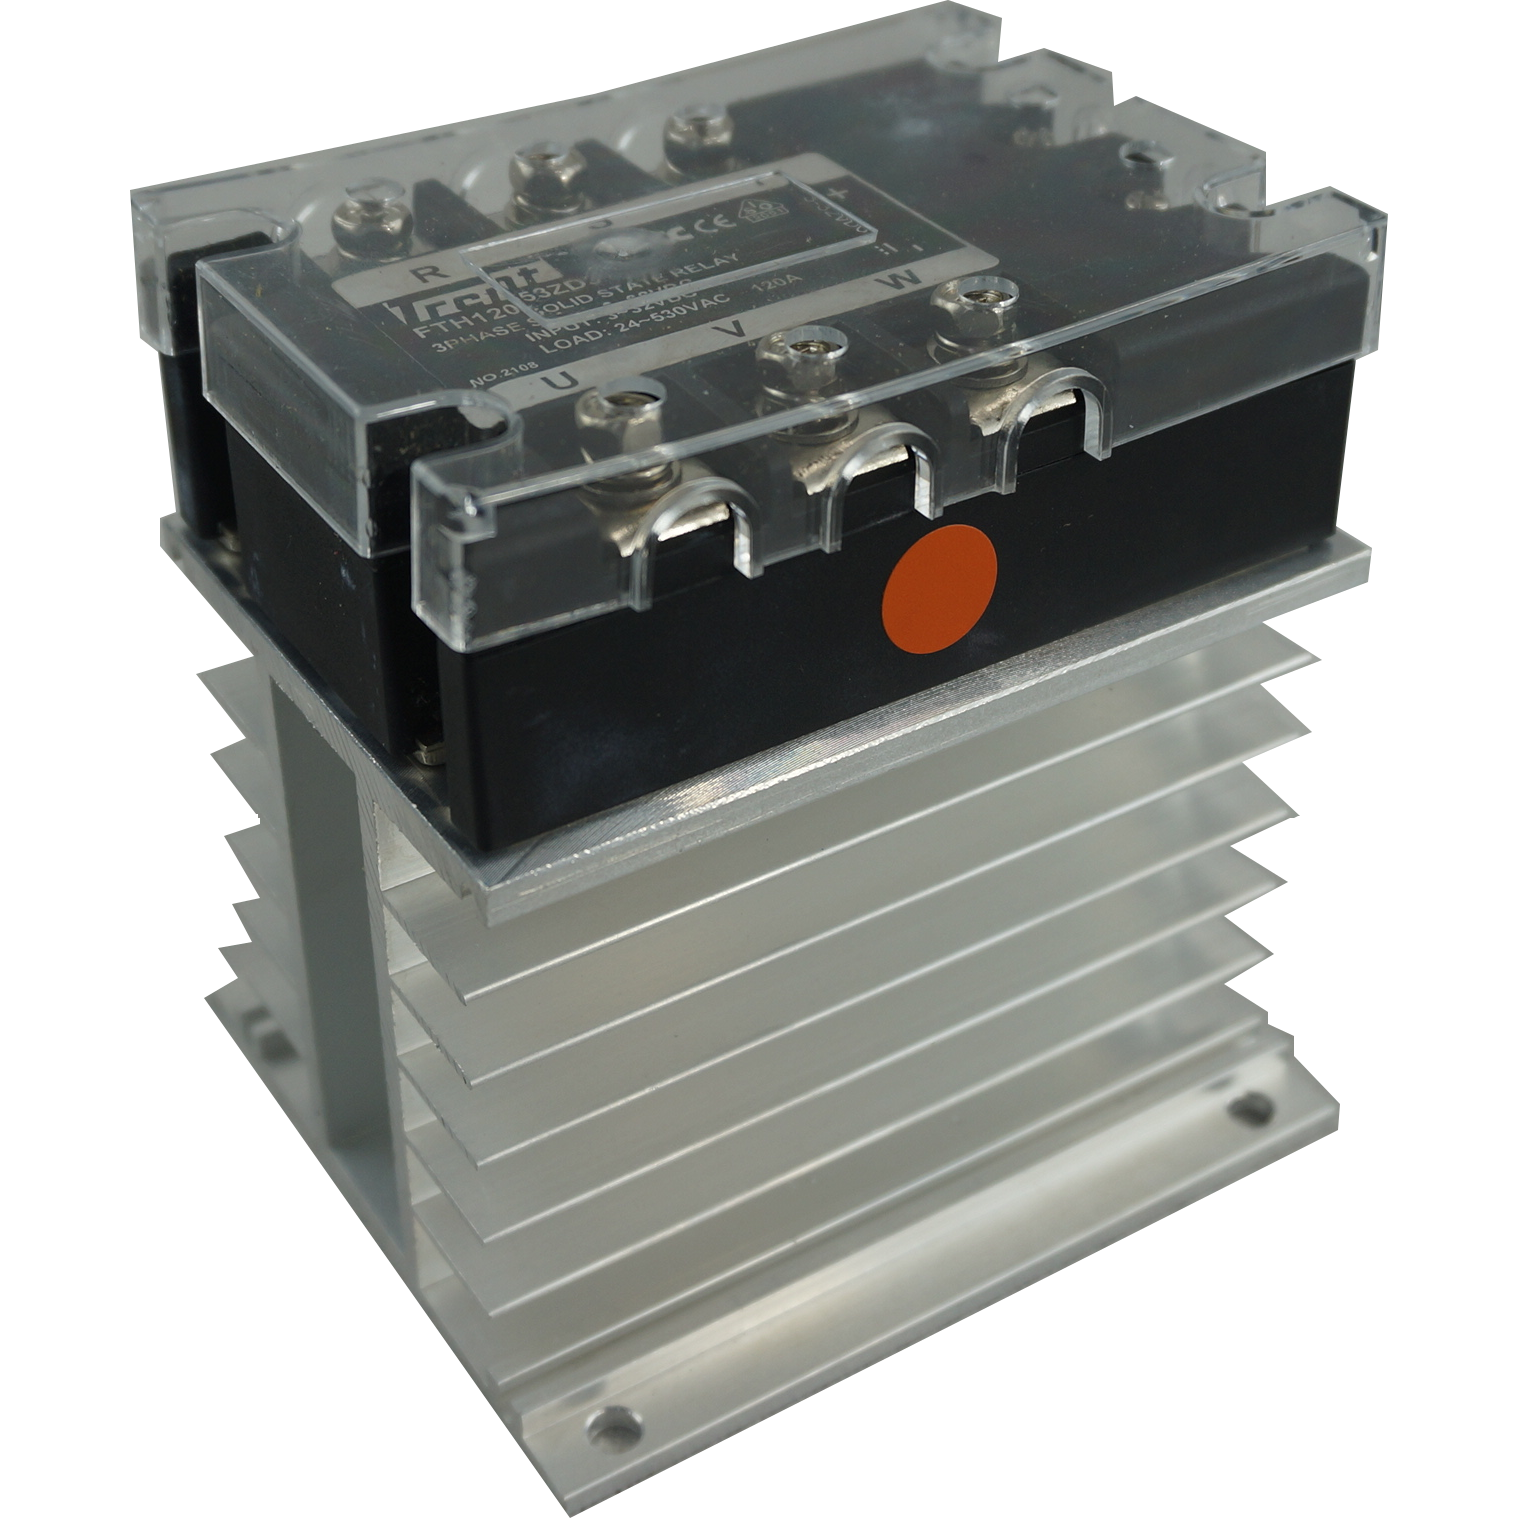 FTH2553ZD3 + HS212DR, Solid State Relay, and Heatsink Assembly, 3 Phase 3-32VDC Control, 20 Amp per phase @ 40 Deg C, 48-530VAC Load, LED Status Indicator, with IP20 Cover